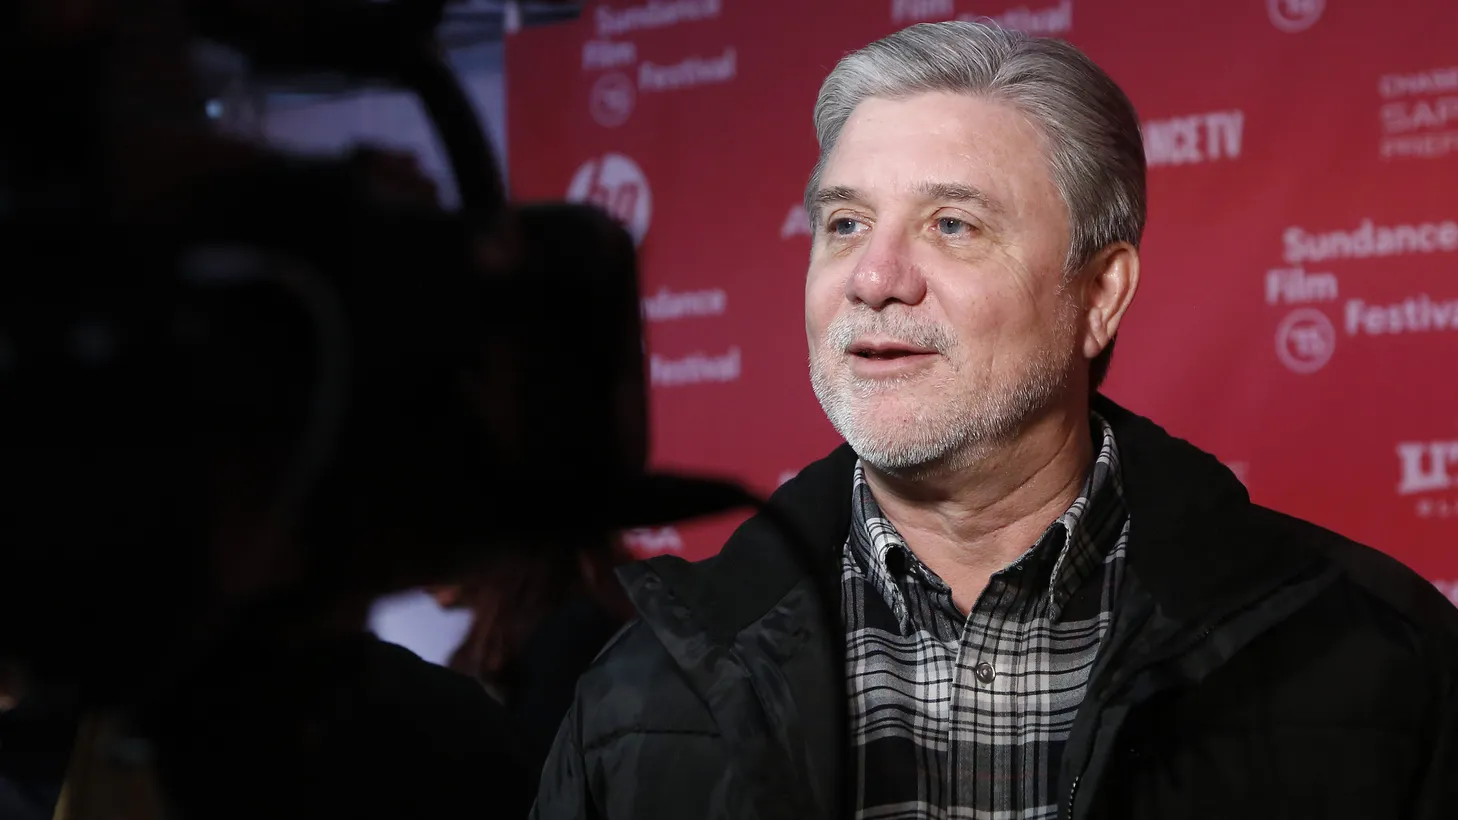 Former Scientology member Mike Rinder attends the premiere of "Going Clear: Scientology and the Prison of Belief" at the Sundance Film Festival in Park City, Utah on January 25, 2015.